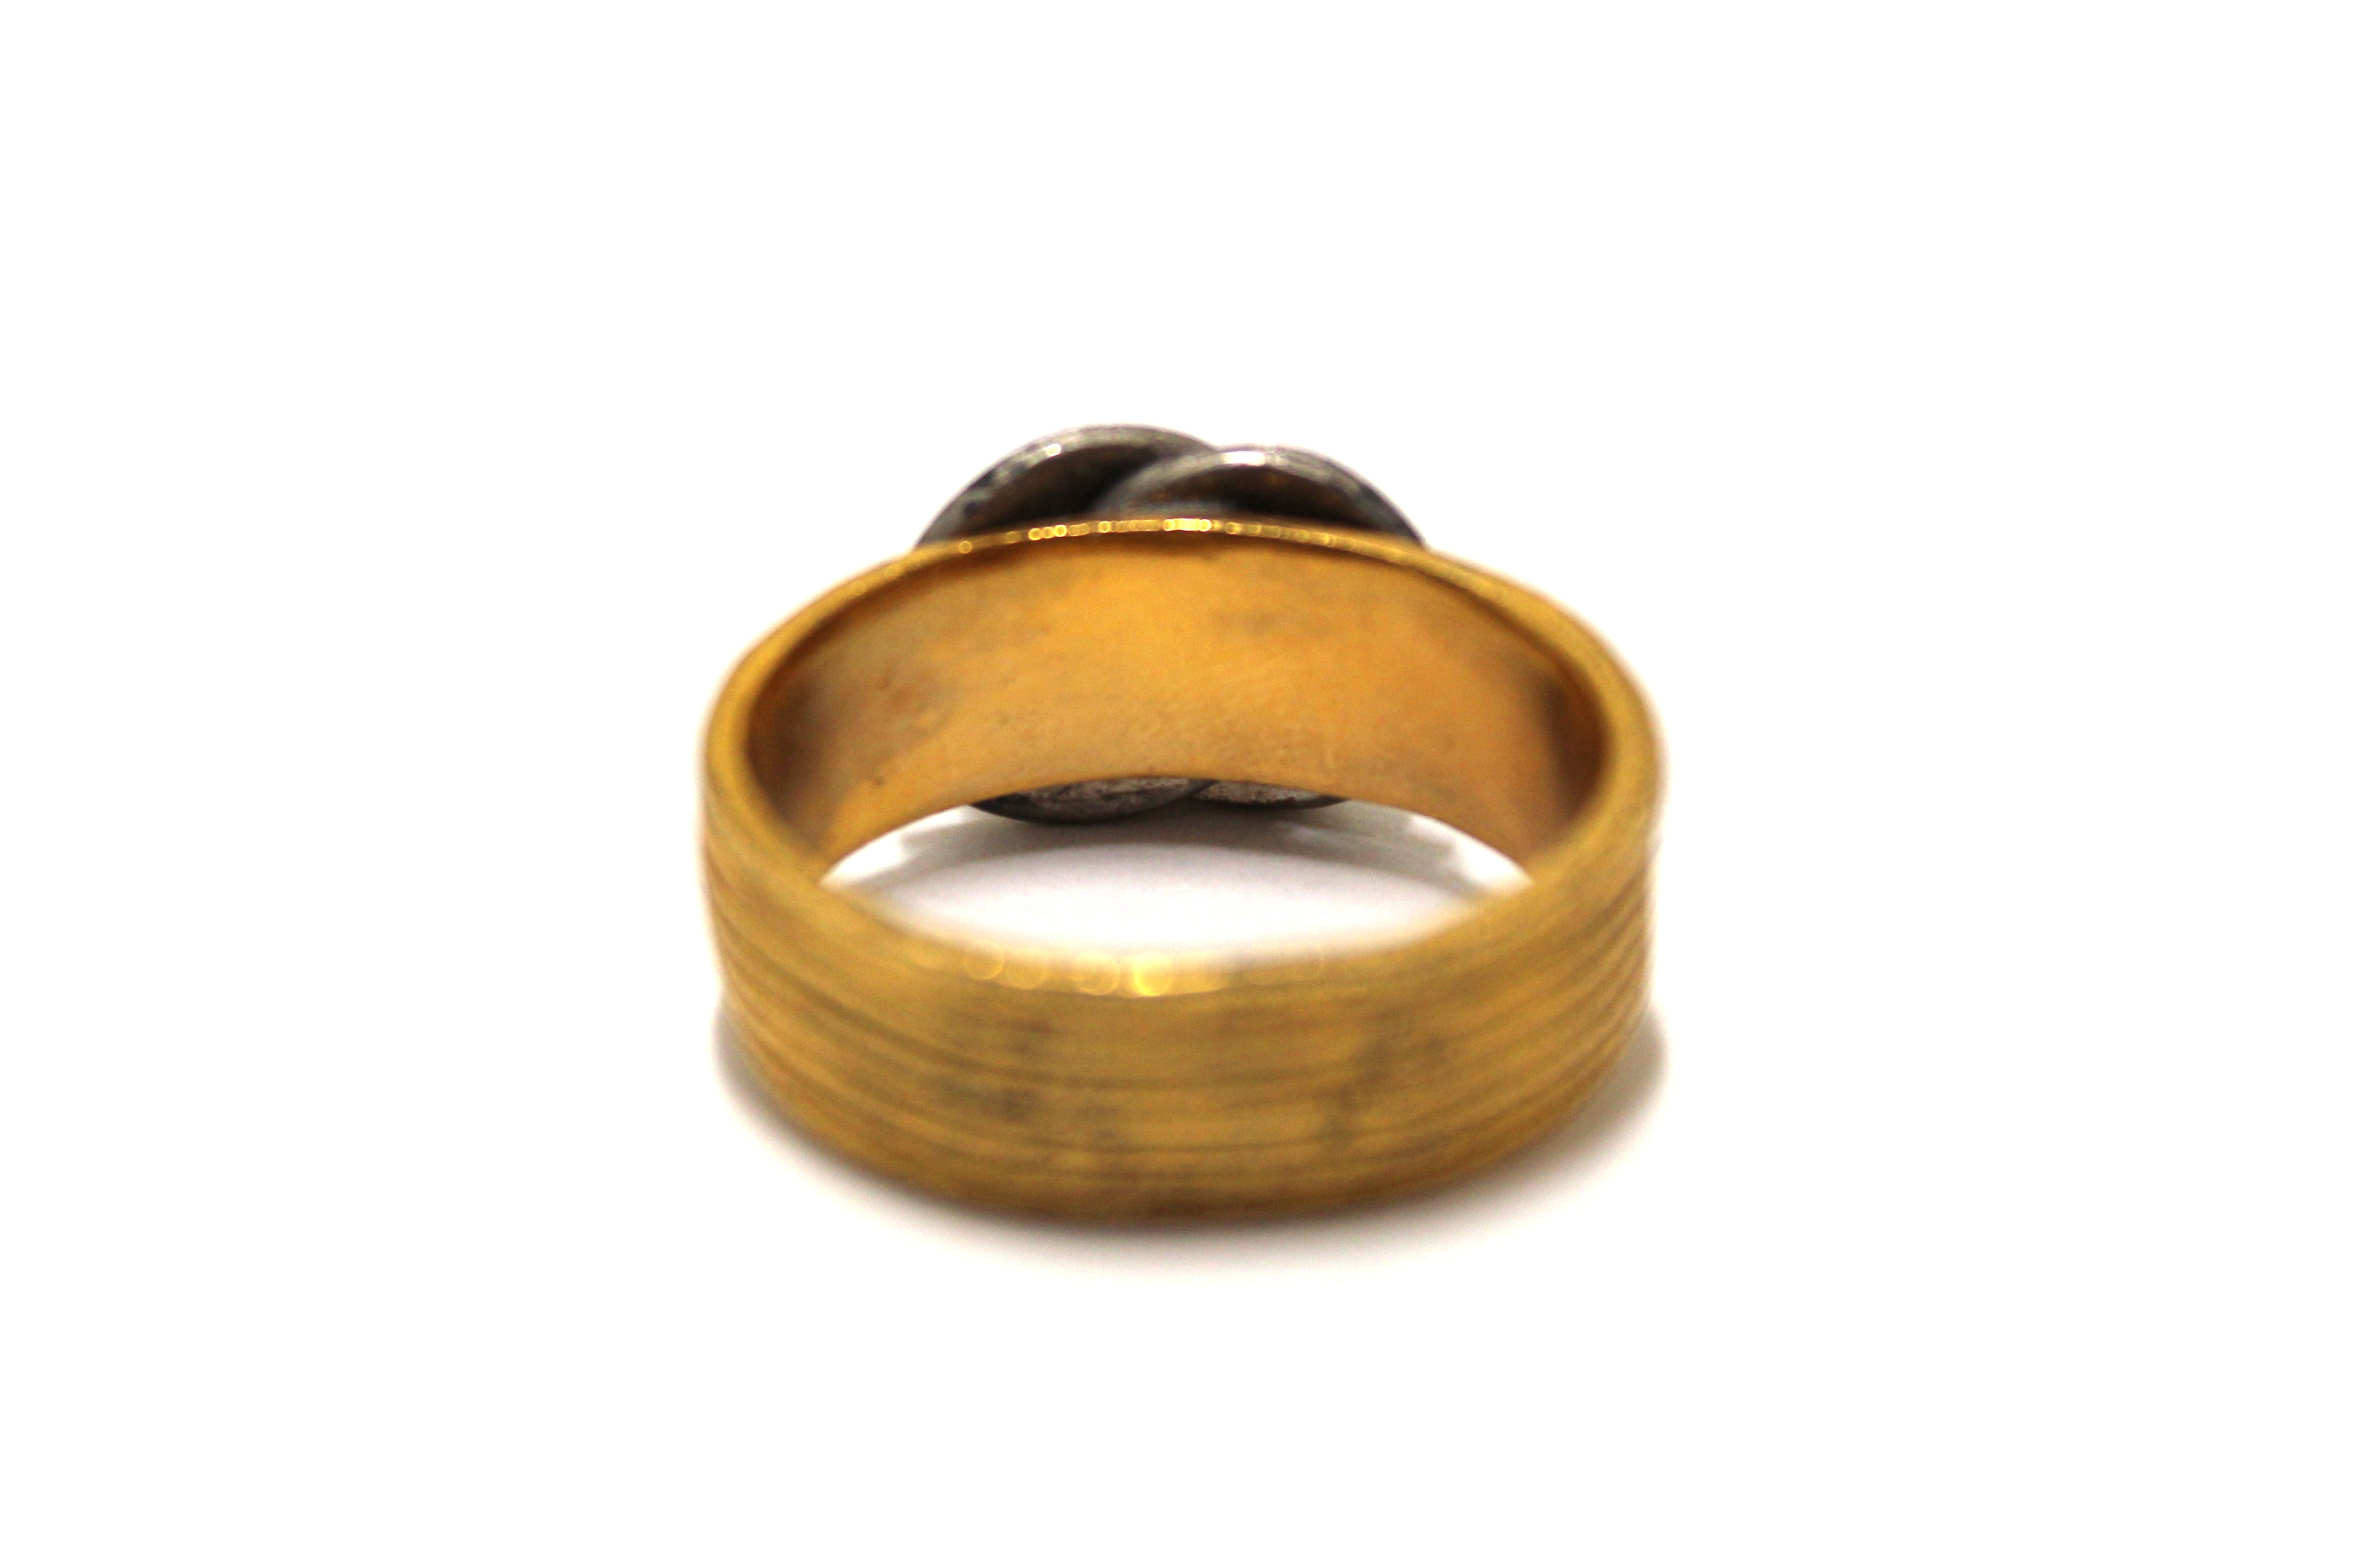 Authentic Vintage Chanel Gold CC Coil Ring Size 8